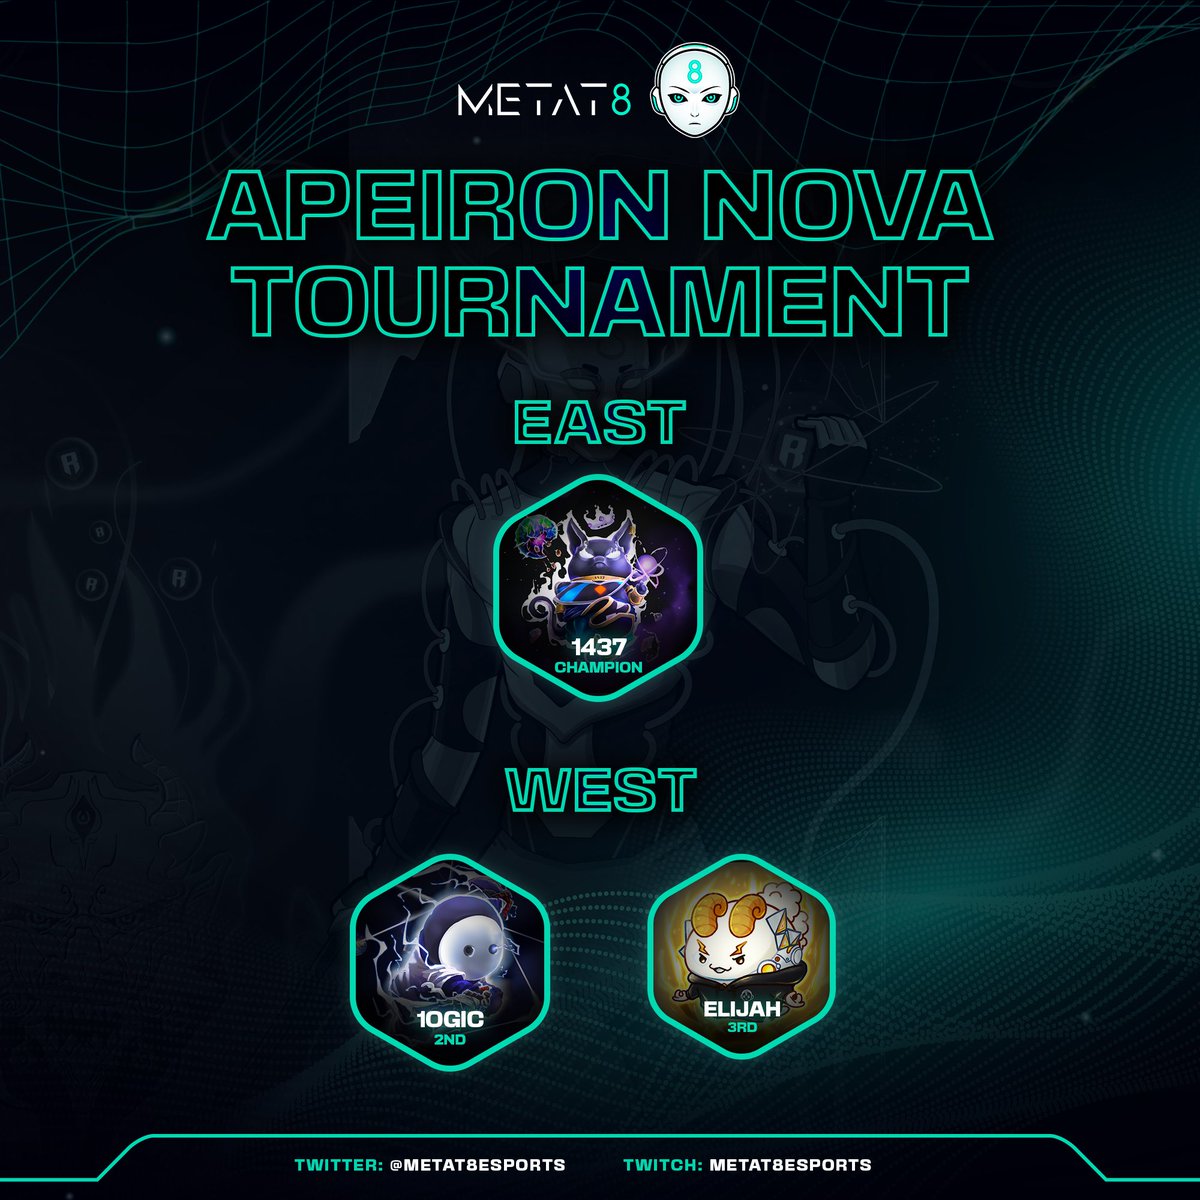 We're kicking off our onslaught on @ApeironNFT with a flourish, dominating both Conferences of the Apeiron Nova Tournament, with @1437MT8 clinching the East, and @1_ogic and @elijahflowers finishing podium in the West. Look out world, our domination is just beginning.